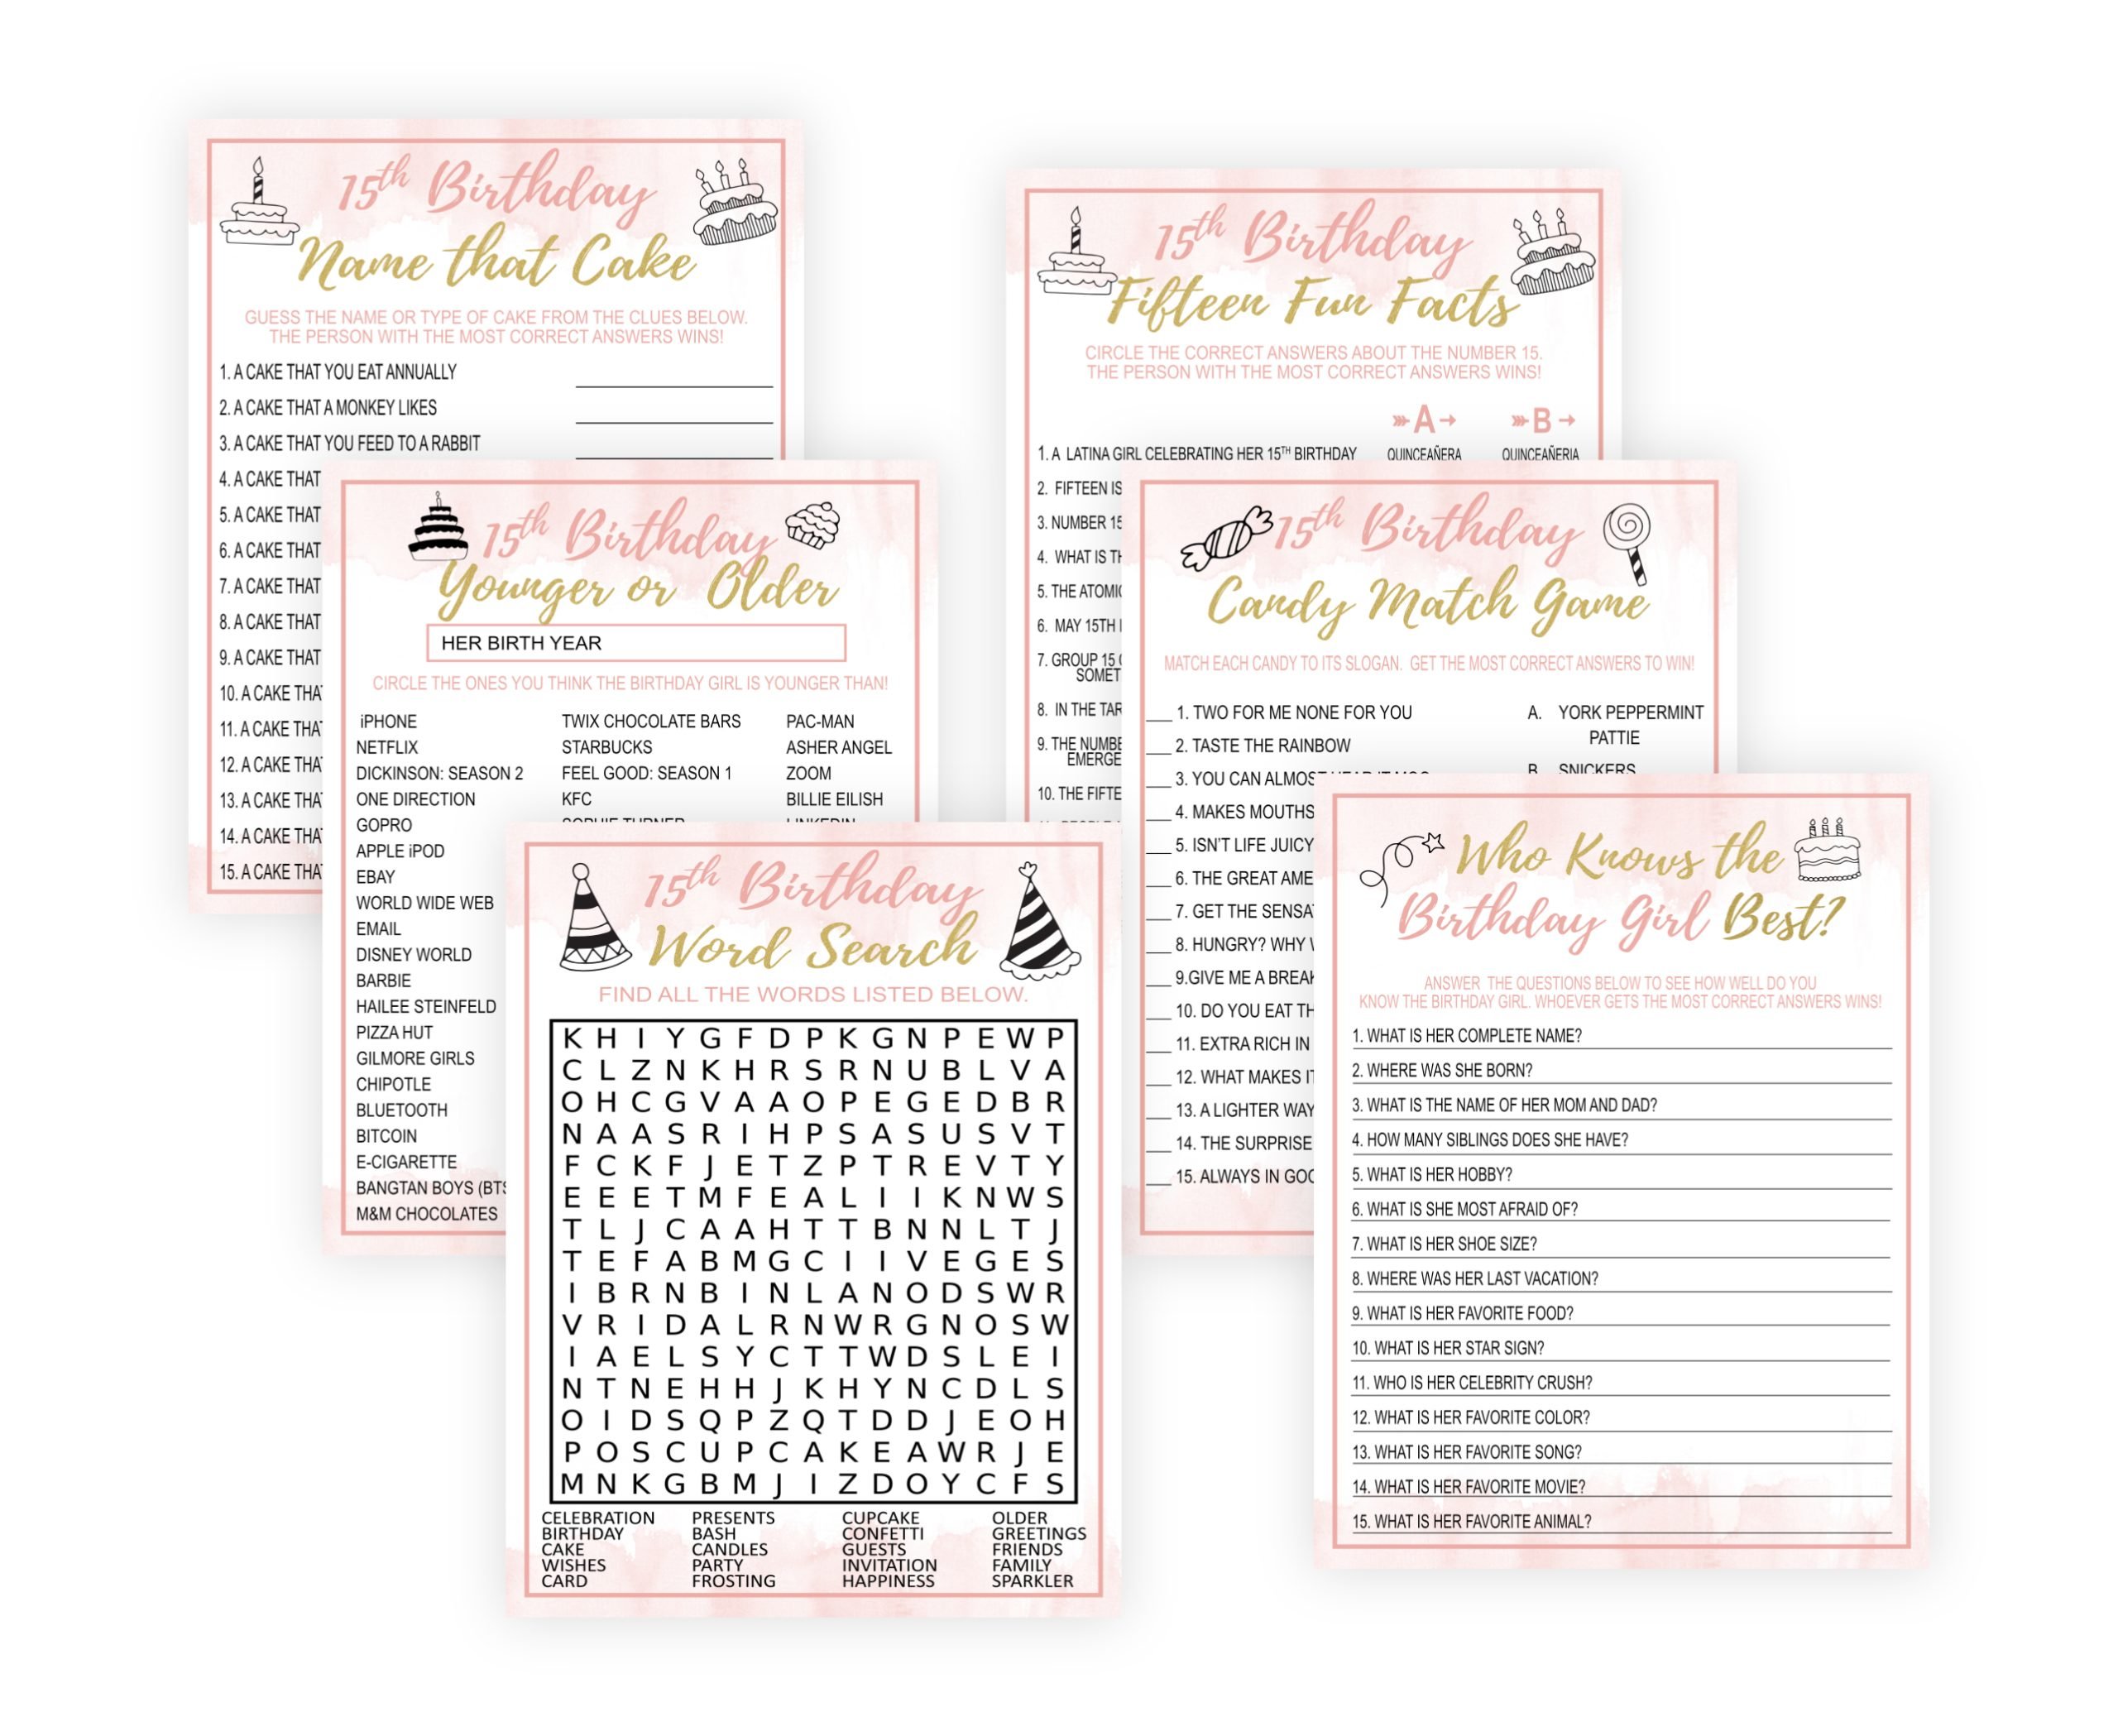 Birthday Games 15th Birthday Party Games for Girls, Rose Gold Blush Pink Quinceañera, PRINTABLE Bundle 15th Birthday Party Games for Girls